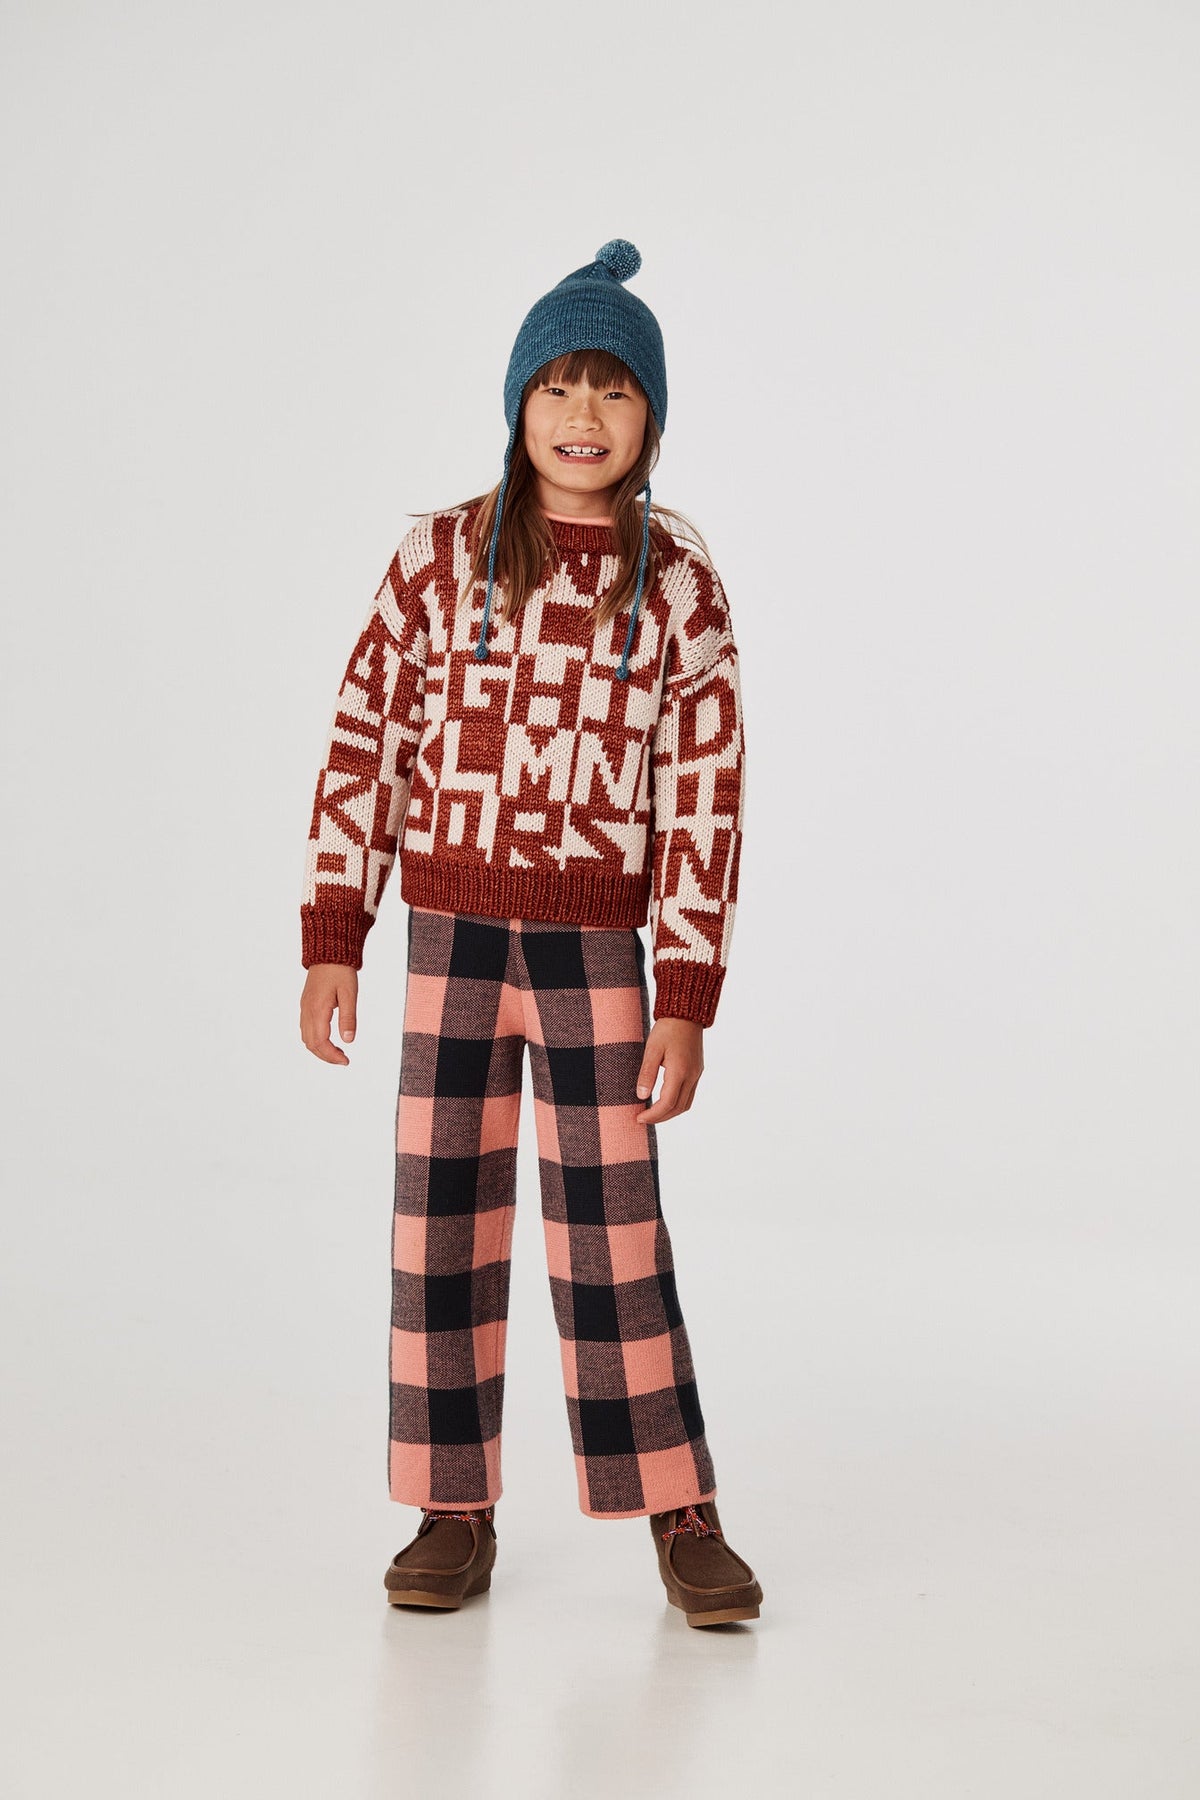 Alphabet Intarsia Sweater - Henna+Model is 48 inches tall, 51lbs, wearing a size 7-8y